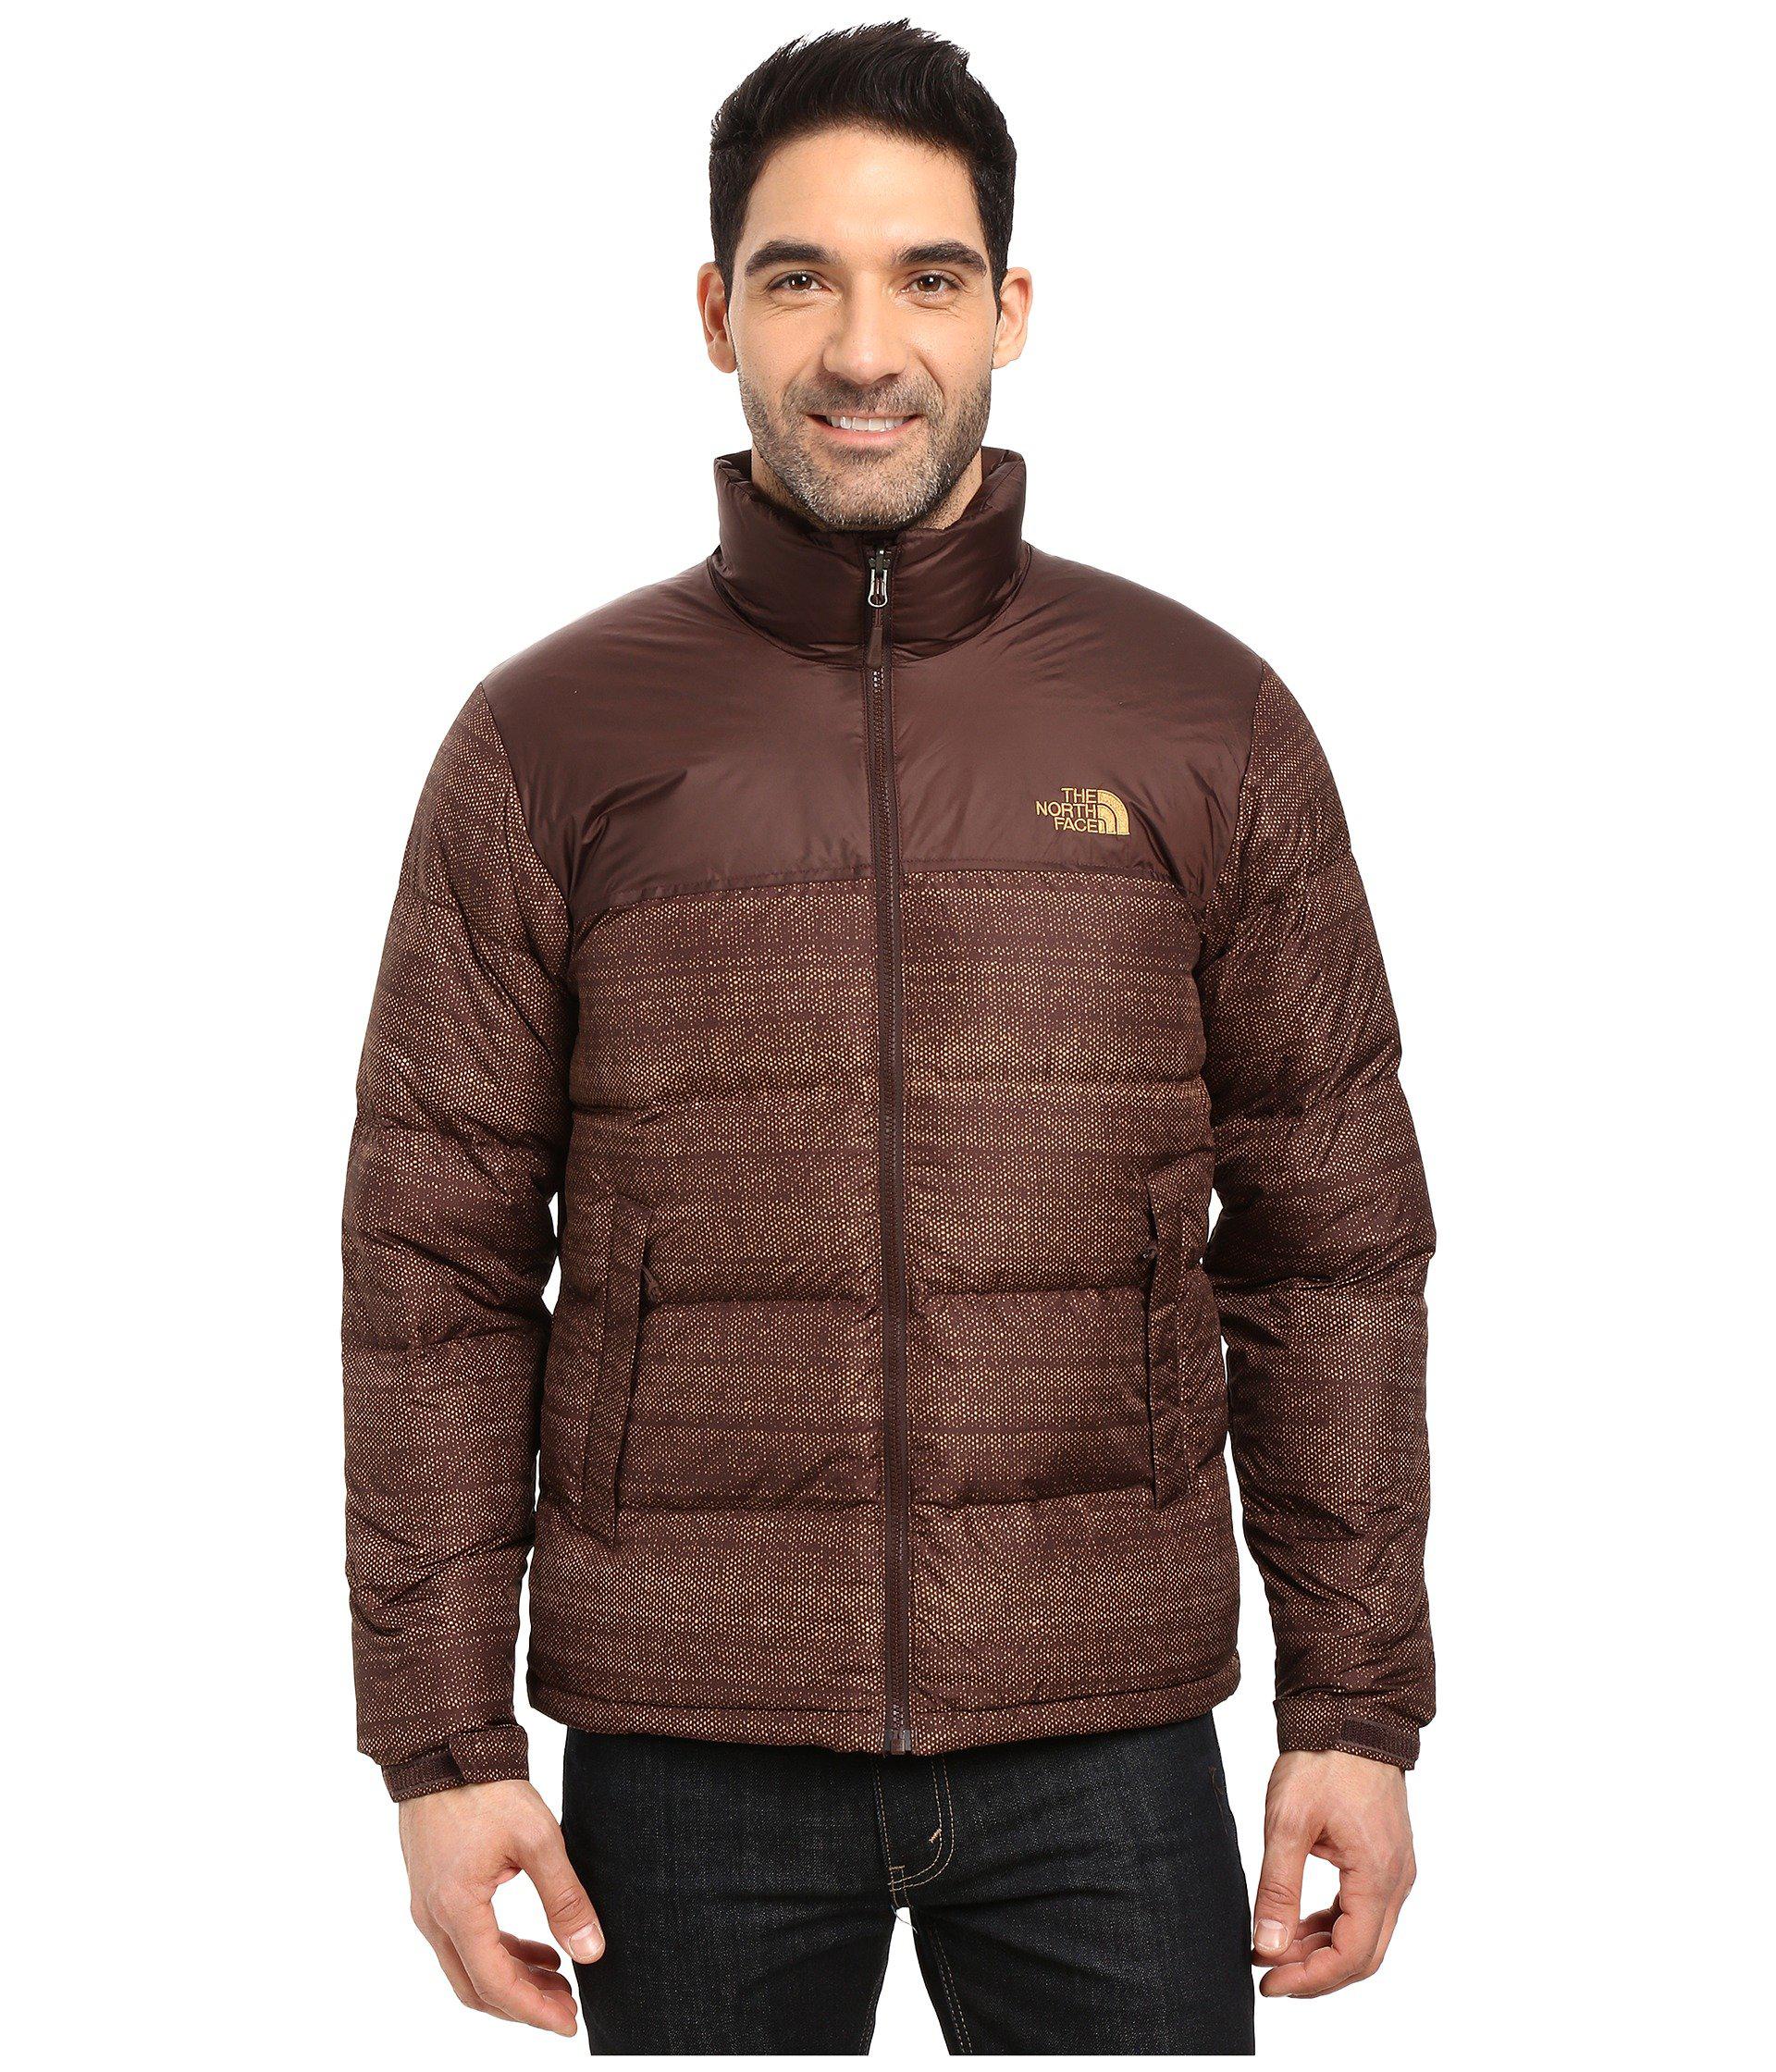 The North Face Goose Nuptse Jacket in Brown for Men - Lyst